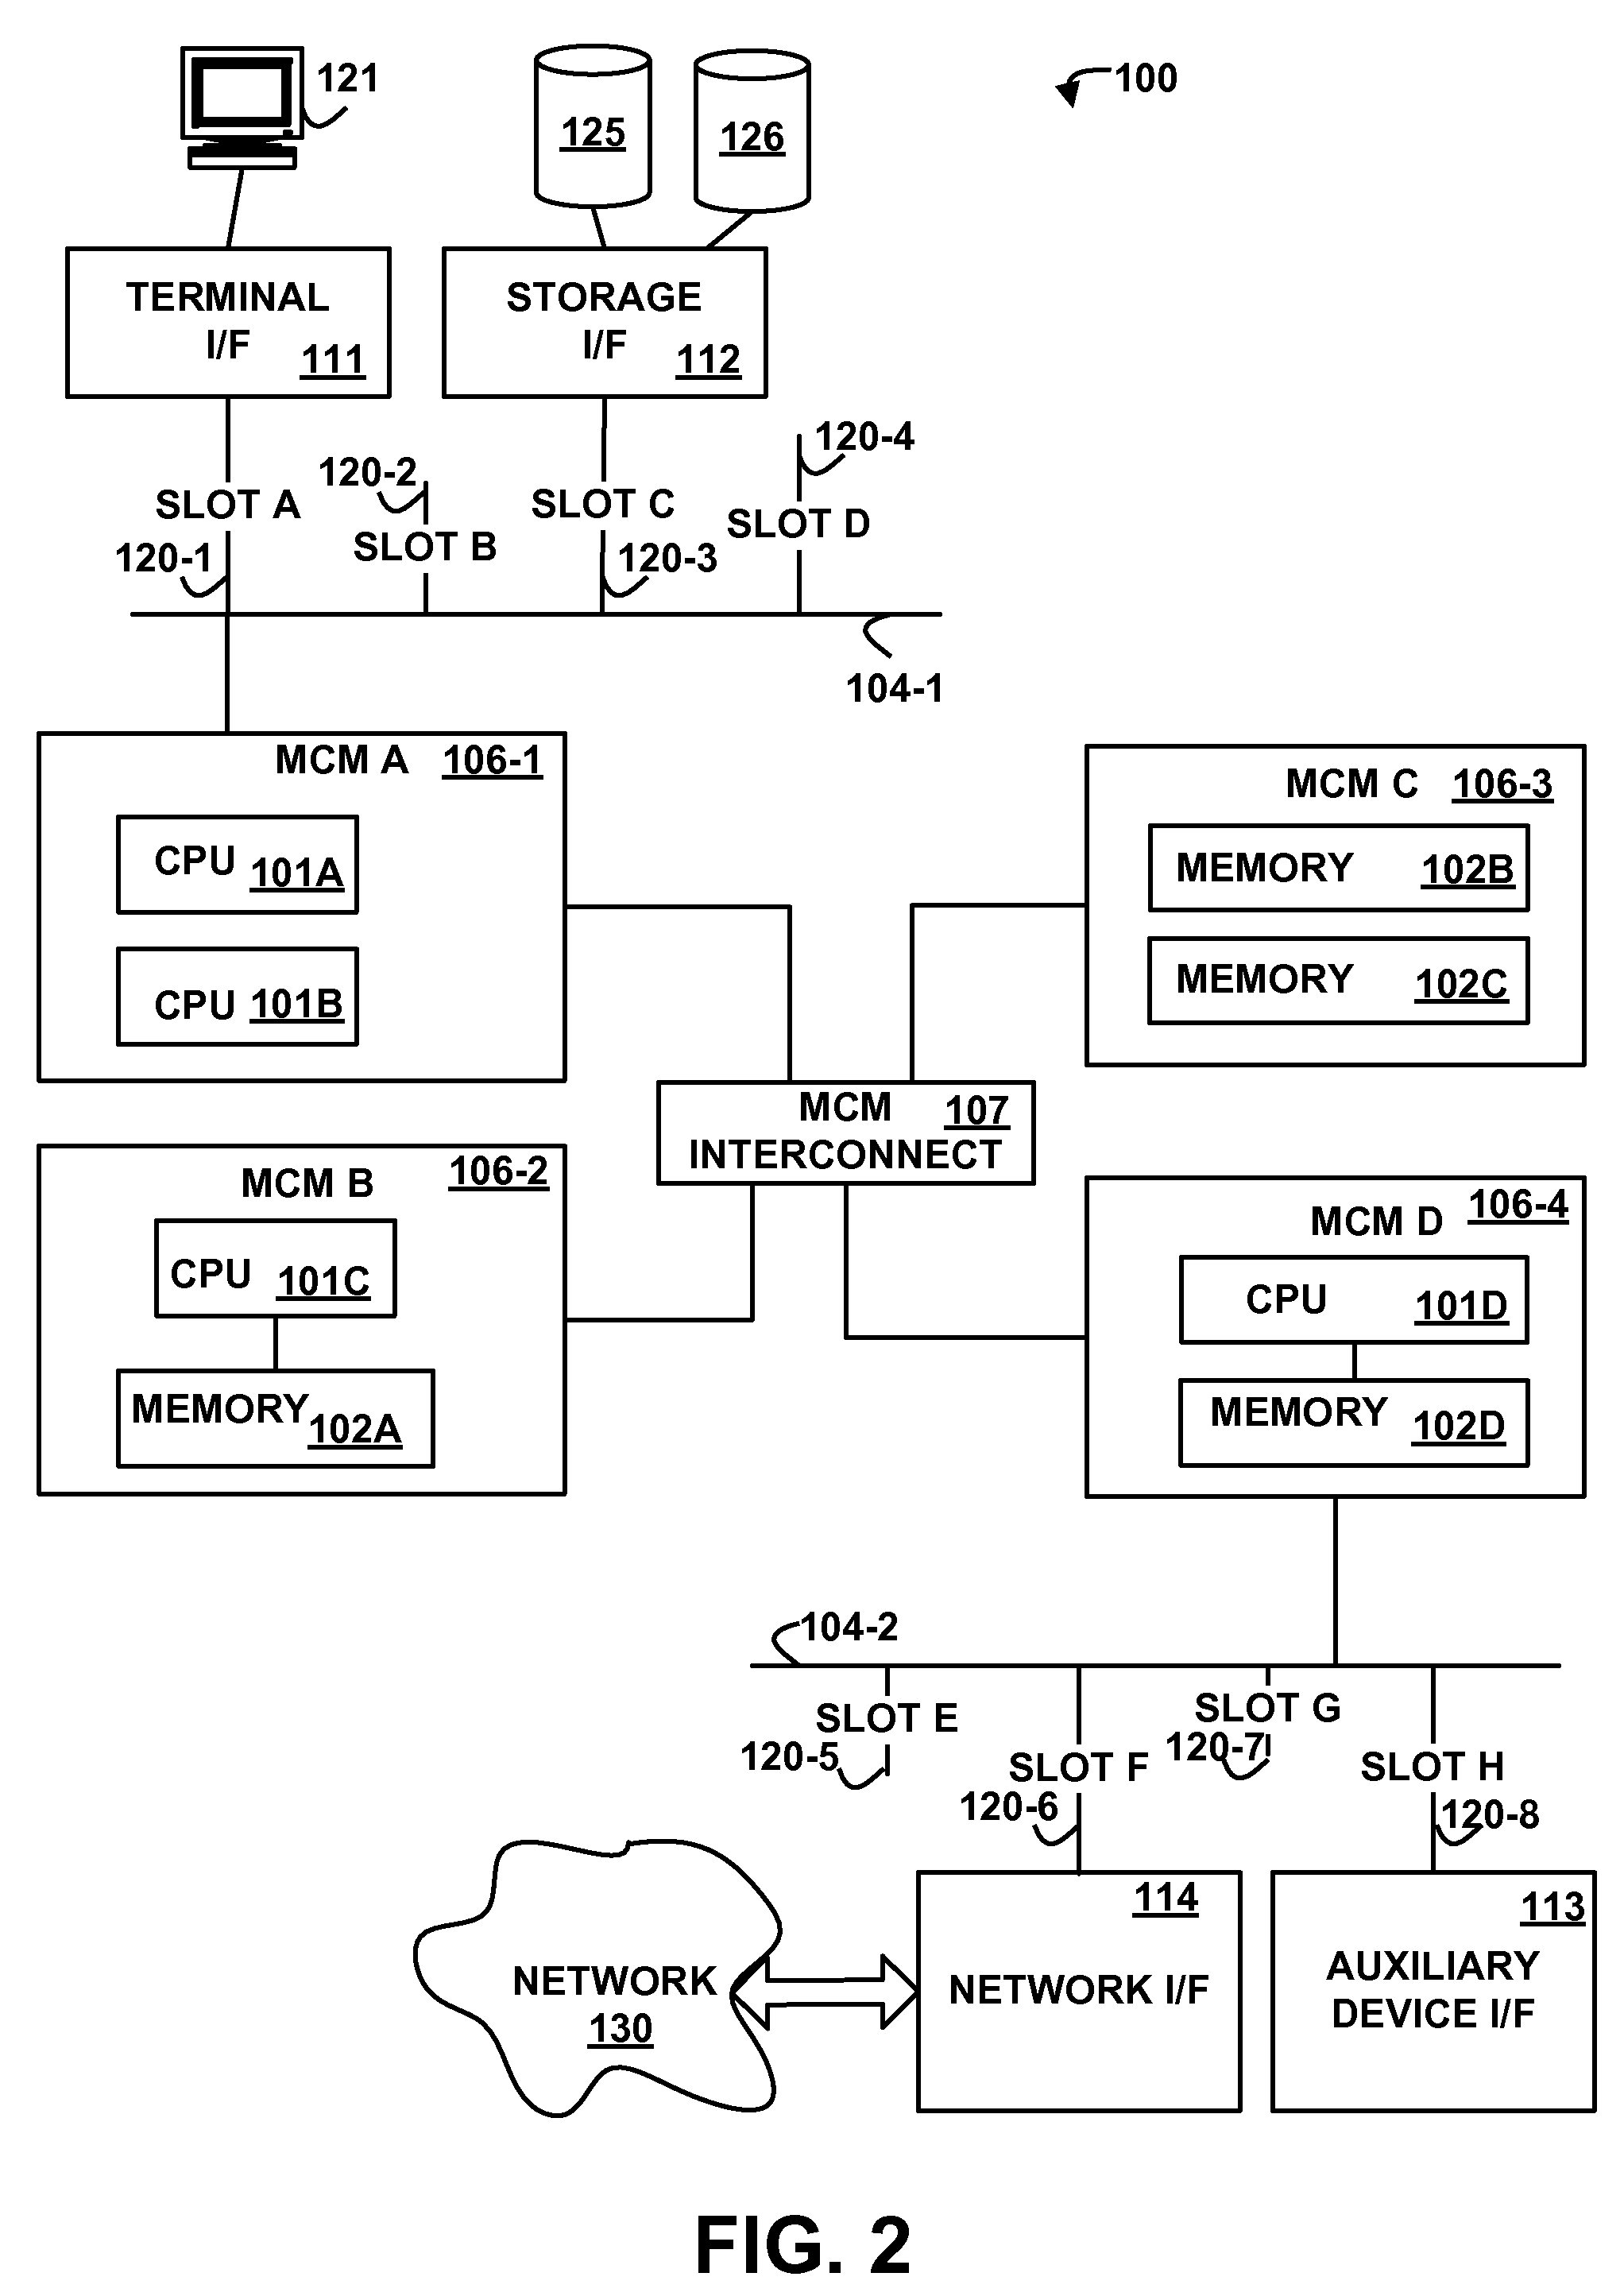 Moving Resources In a Computing Environment Having Multiple Logically-Partitioned Computer Systems